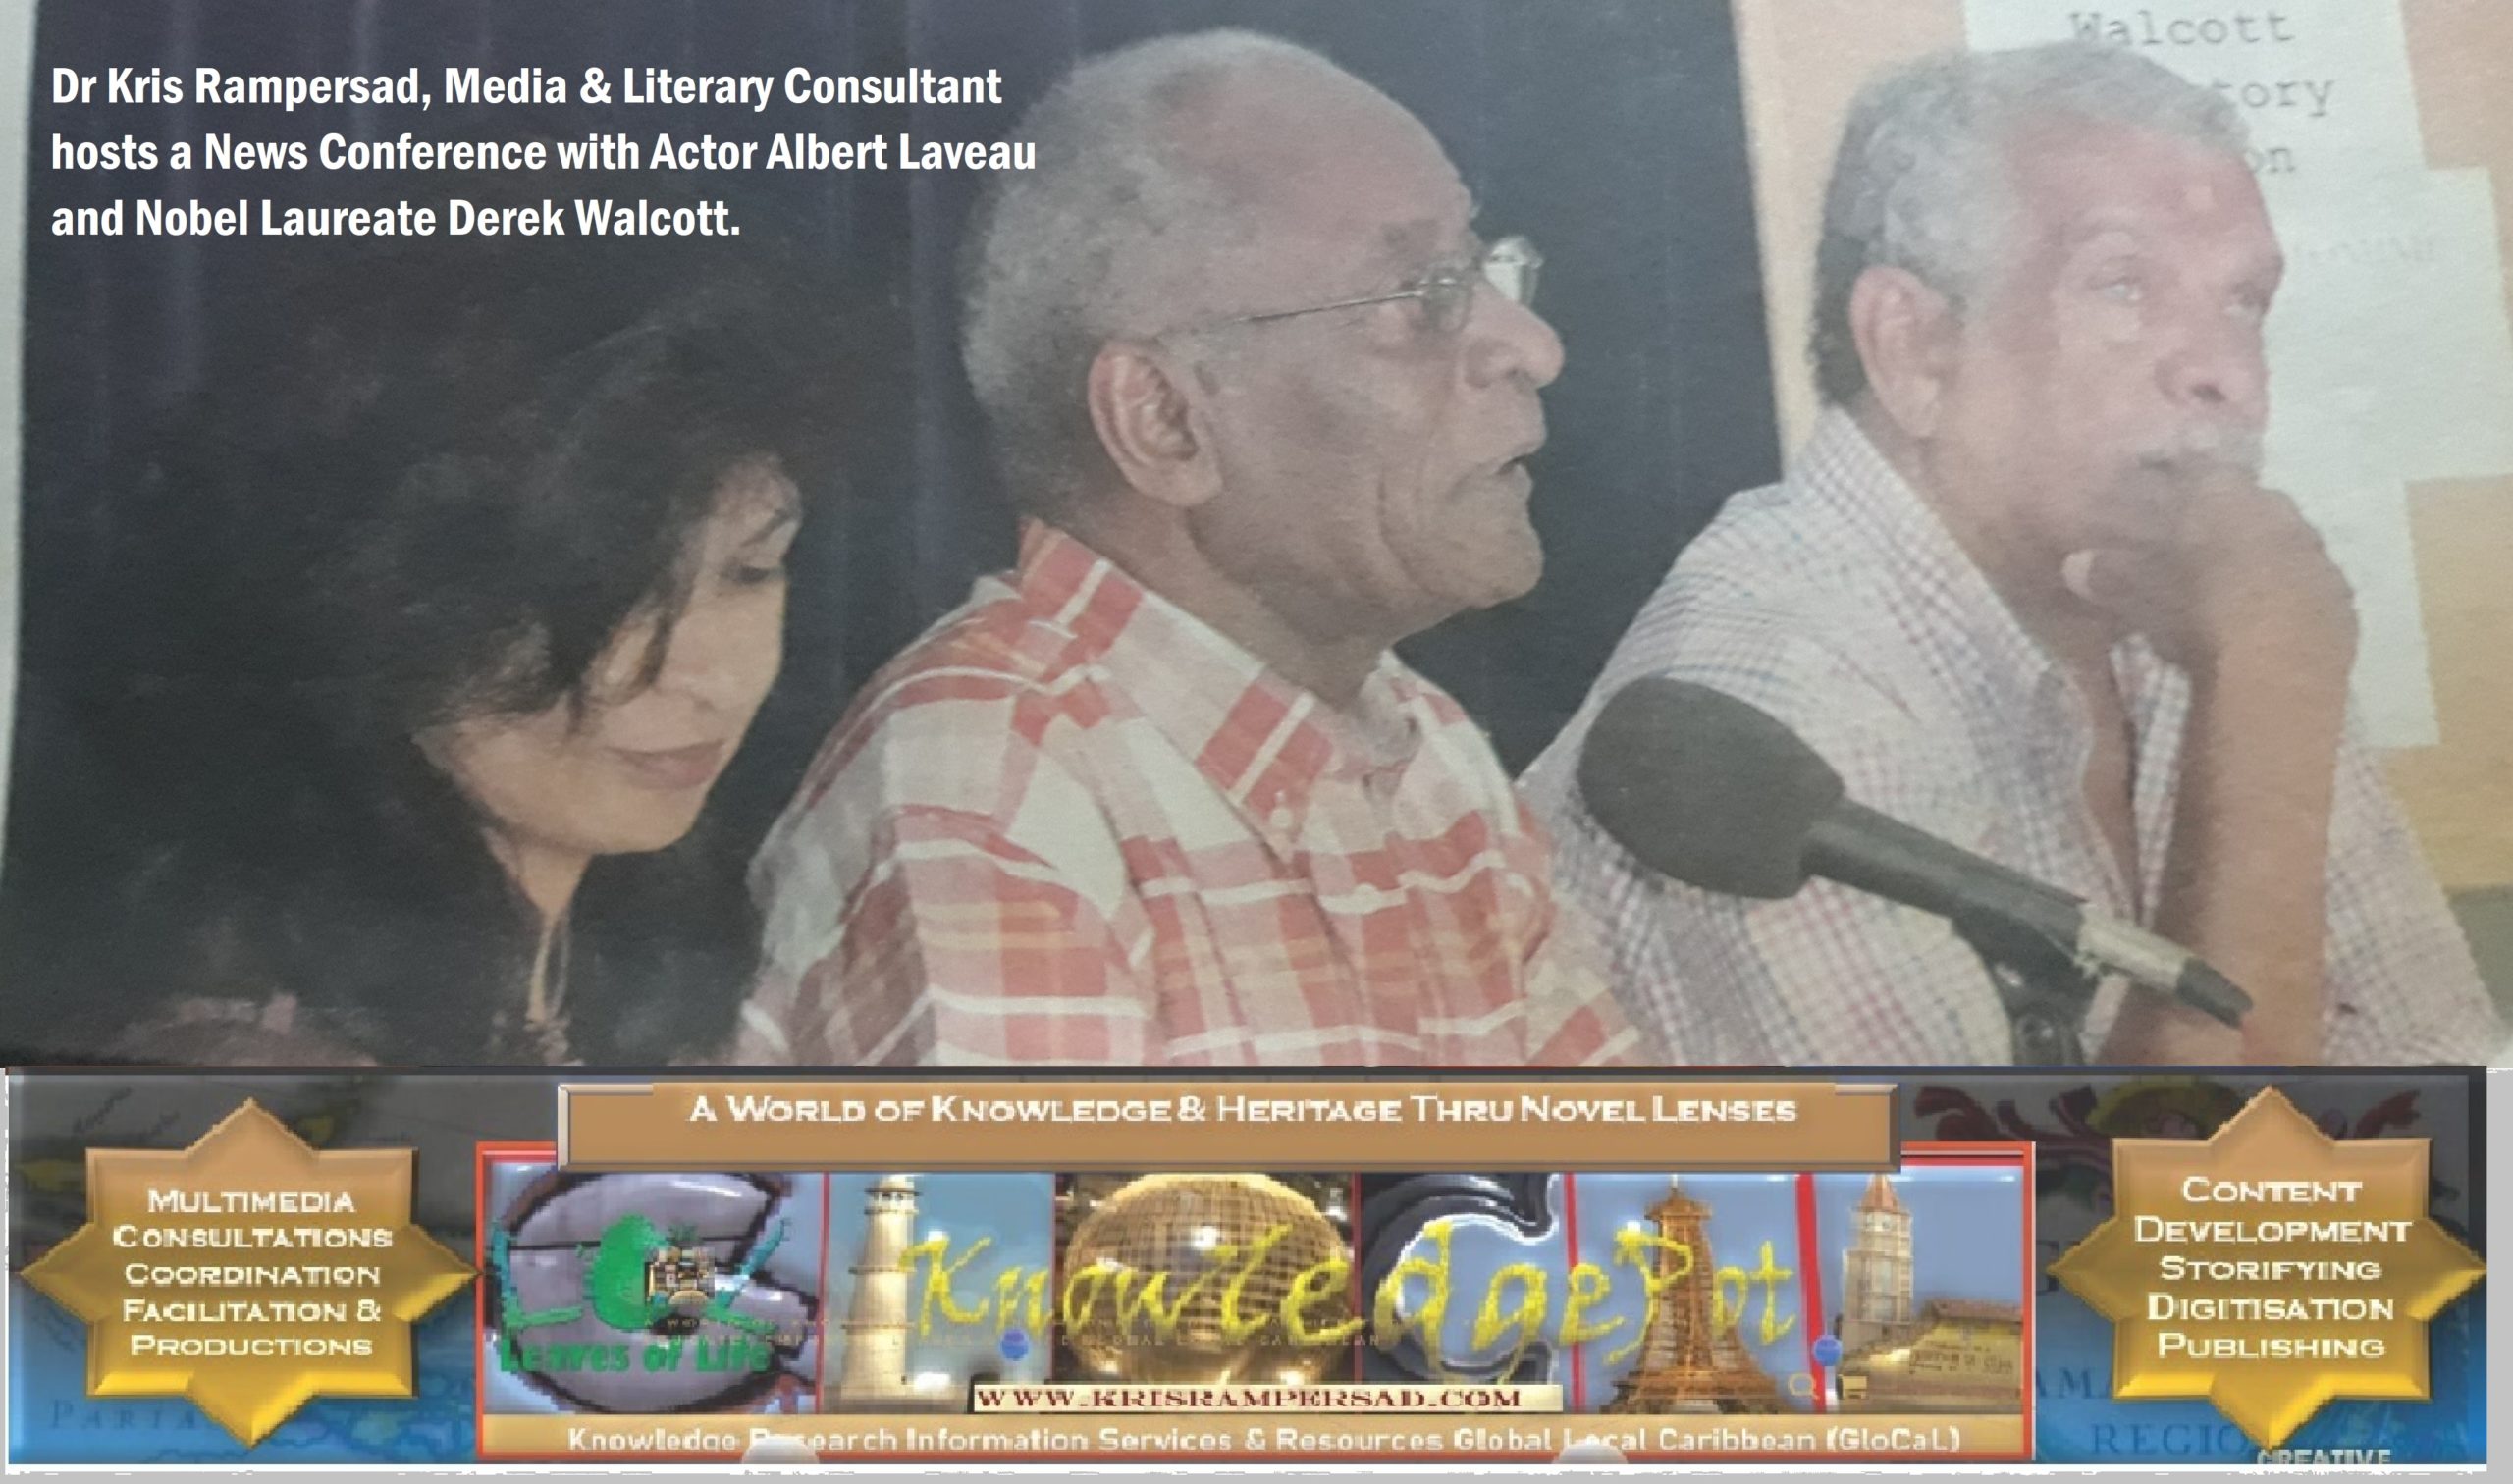 Media and Literary Consultant Educator and Author, Dr Kris Rampersad host news conference with Nobel Laureate Derek Walcott (right) and Theatre Manager Actor Albert Laveau